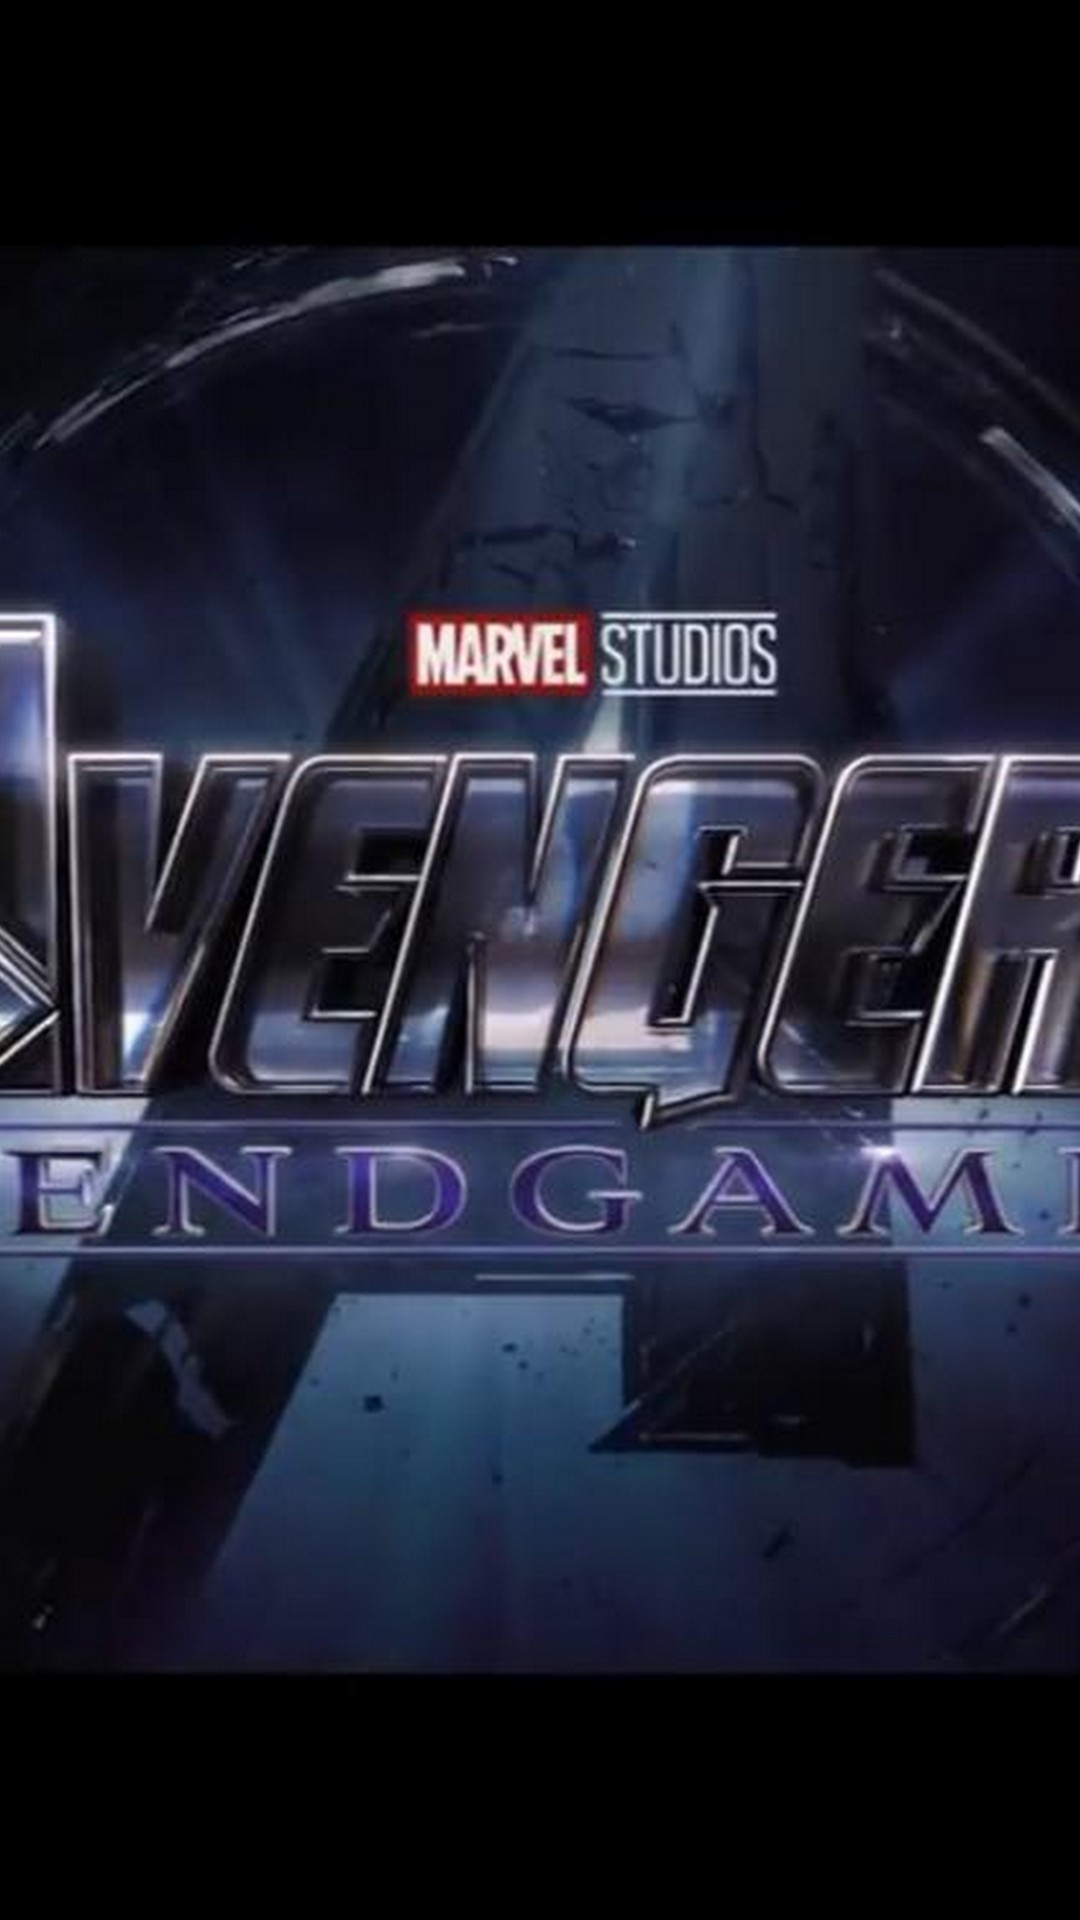 Avengers Endgame 2019 Backgrounds For Android With - Marvel Studios - HD Wallpaper 